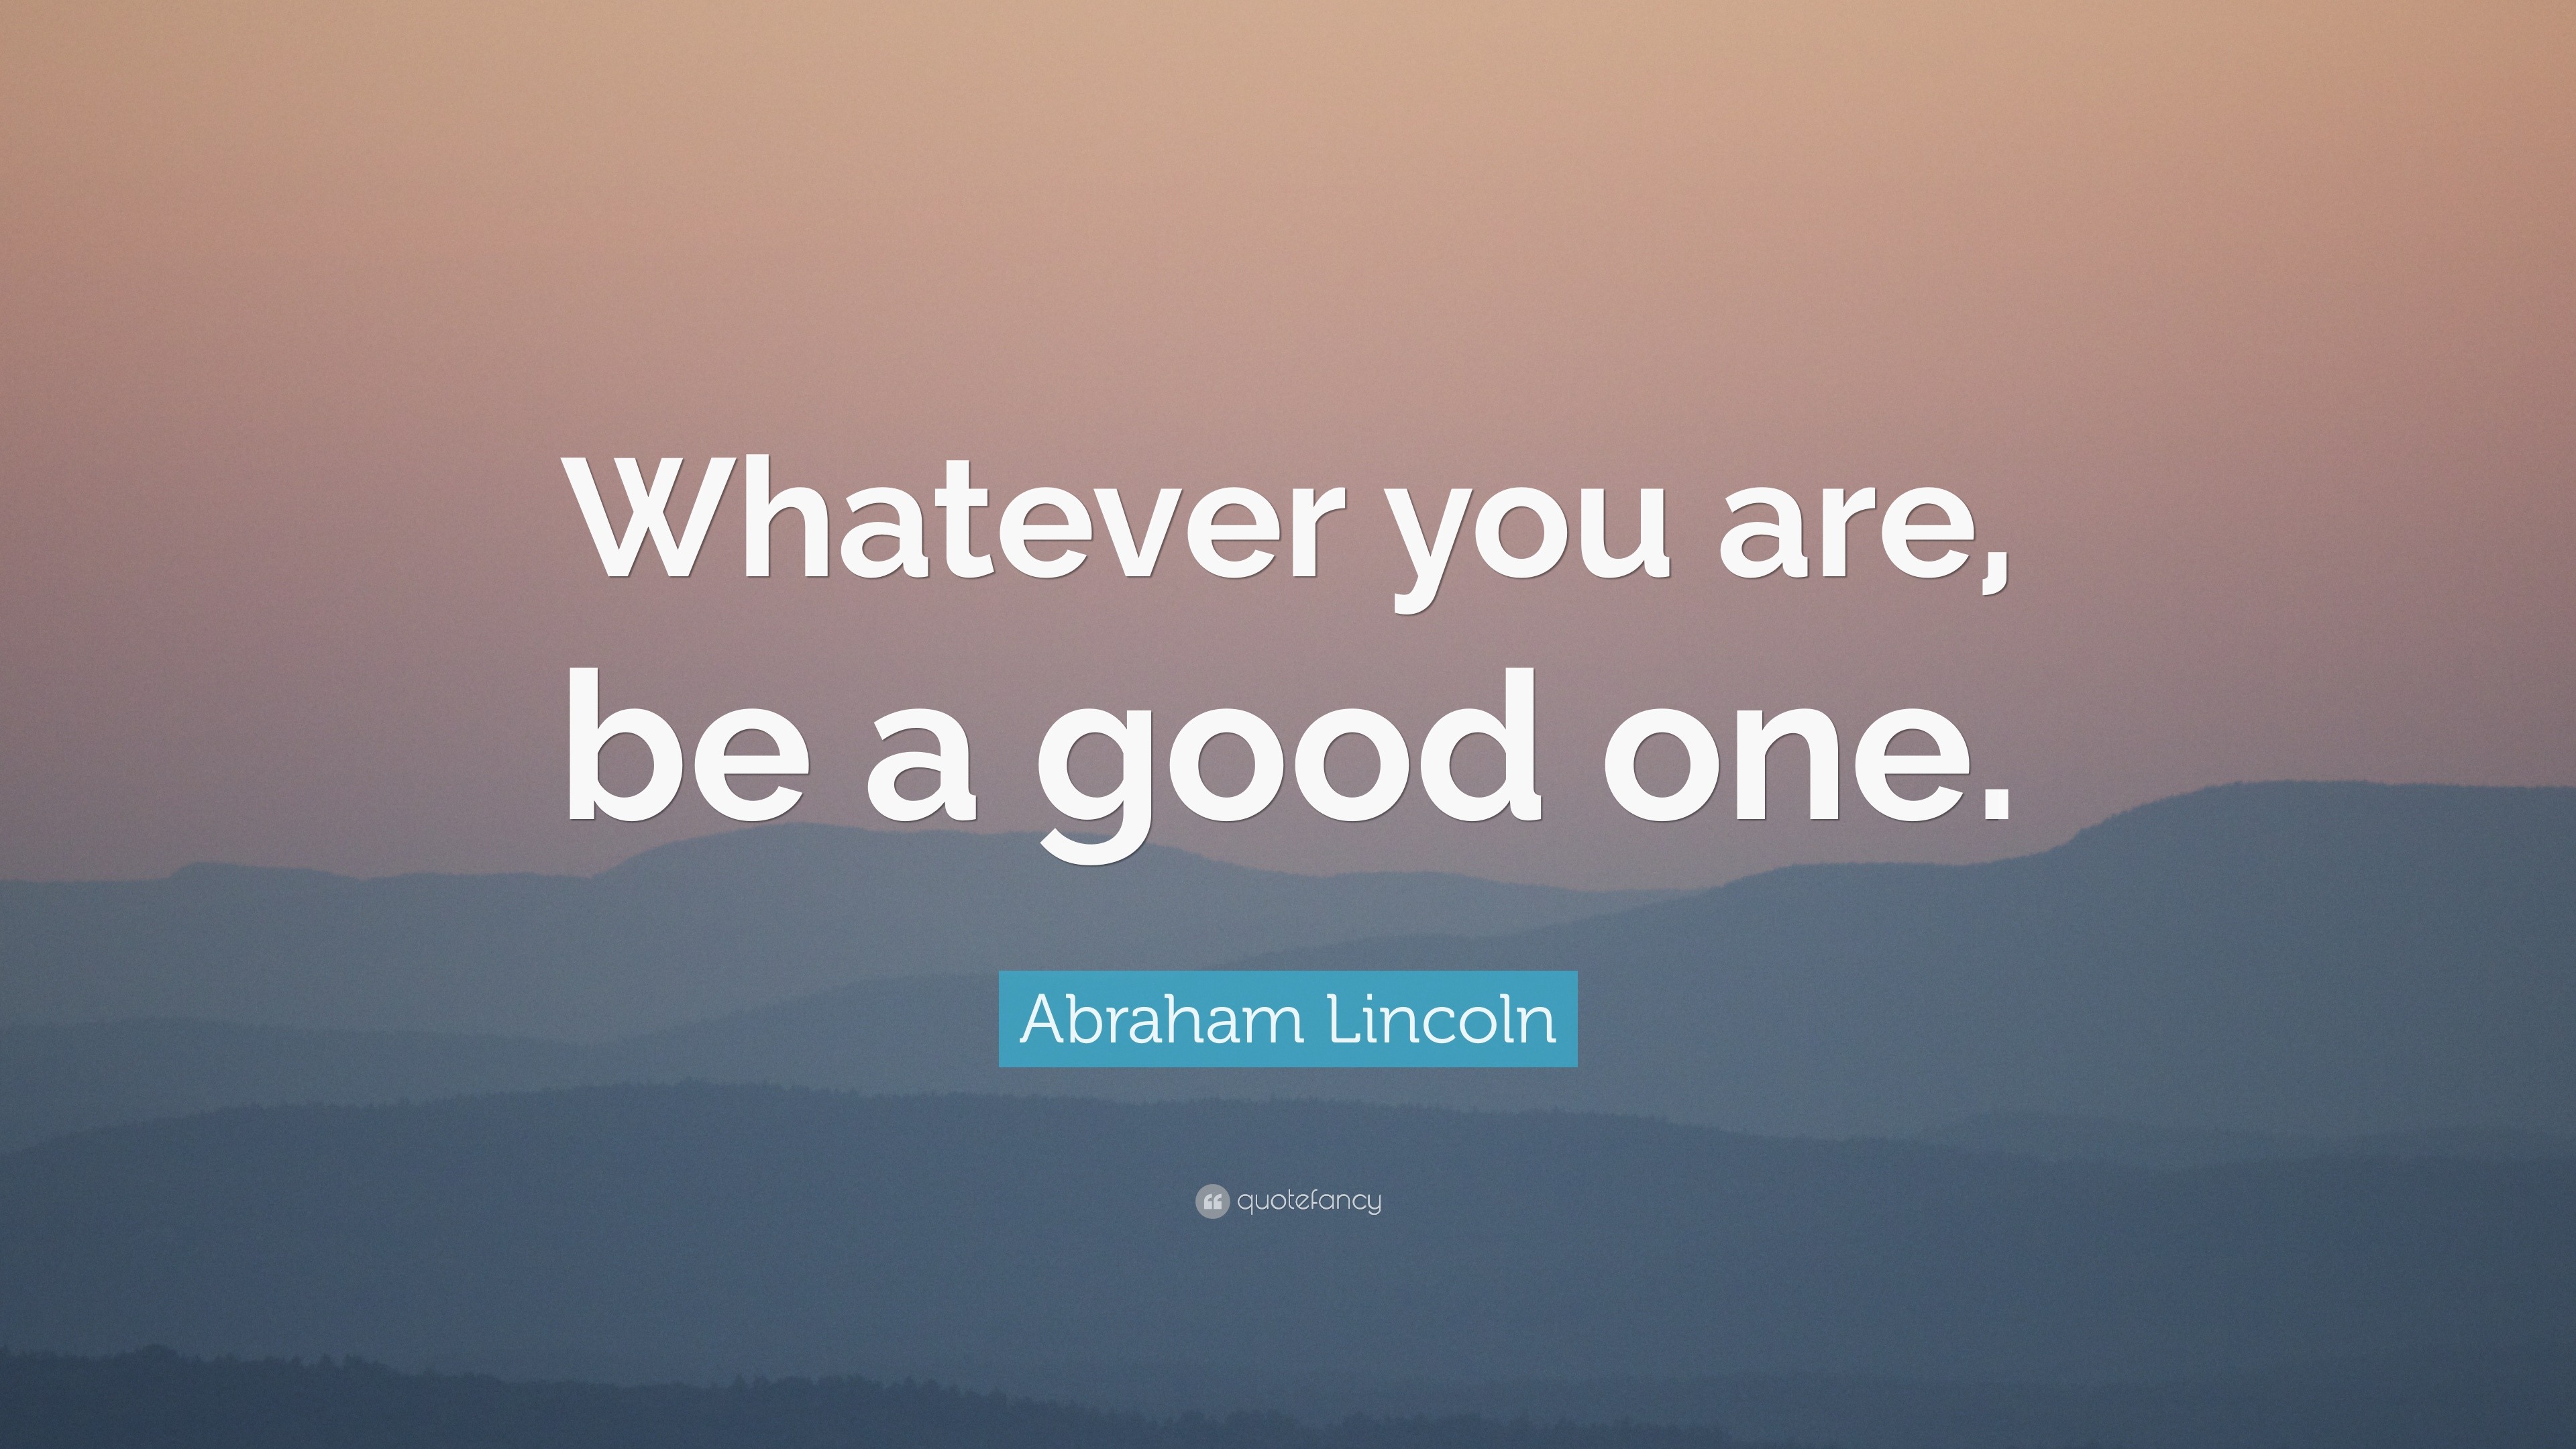 Abraham Lincoln Quote: “Whatever you are, be a good one.” (23 wallpapers) - Quotefancy